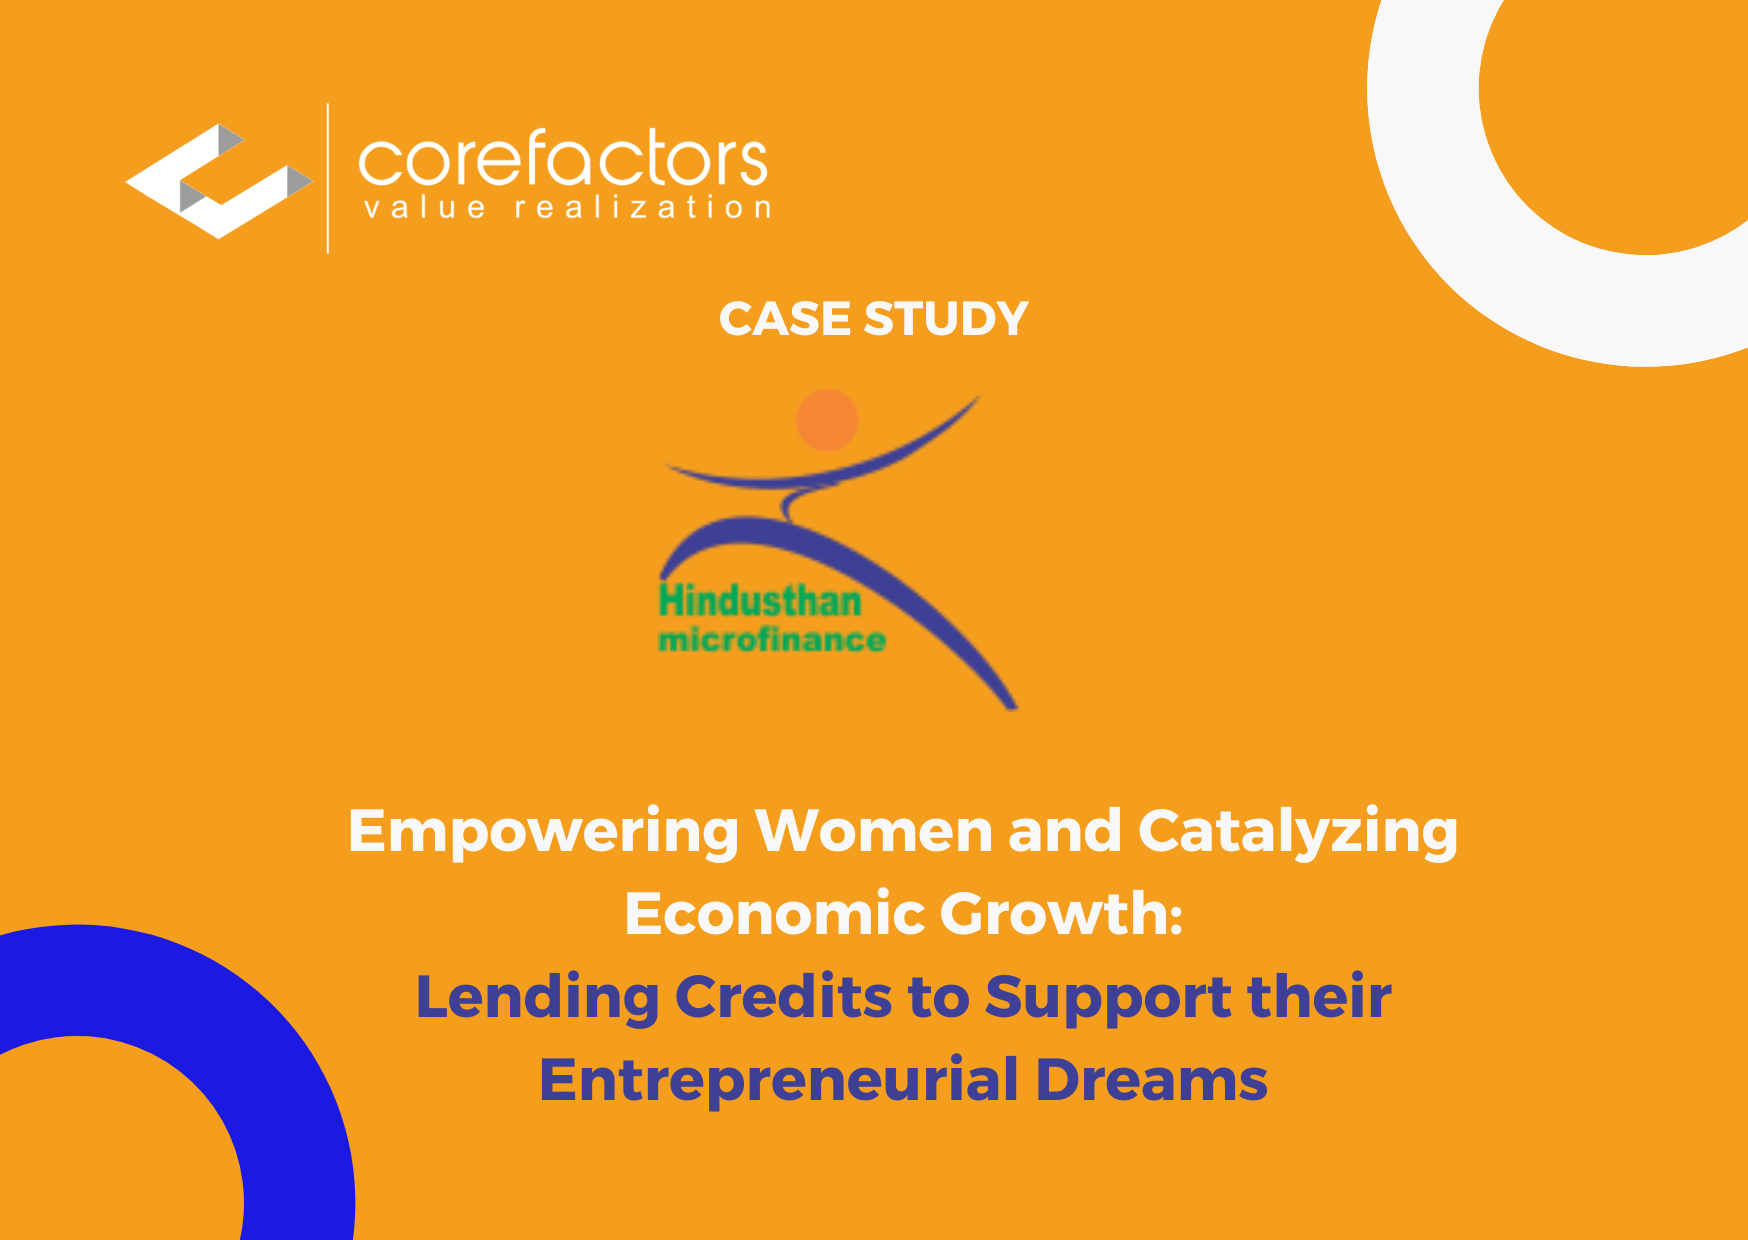 HMPL's Success Story: Empowering Women and Catelyzing Growth